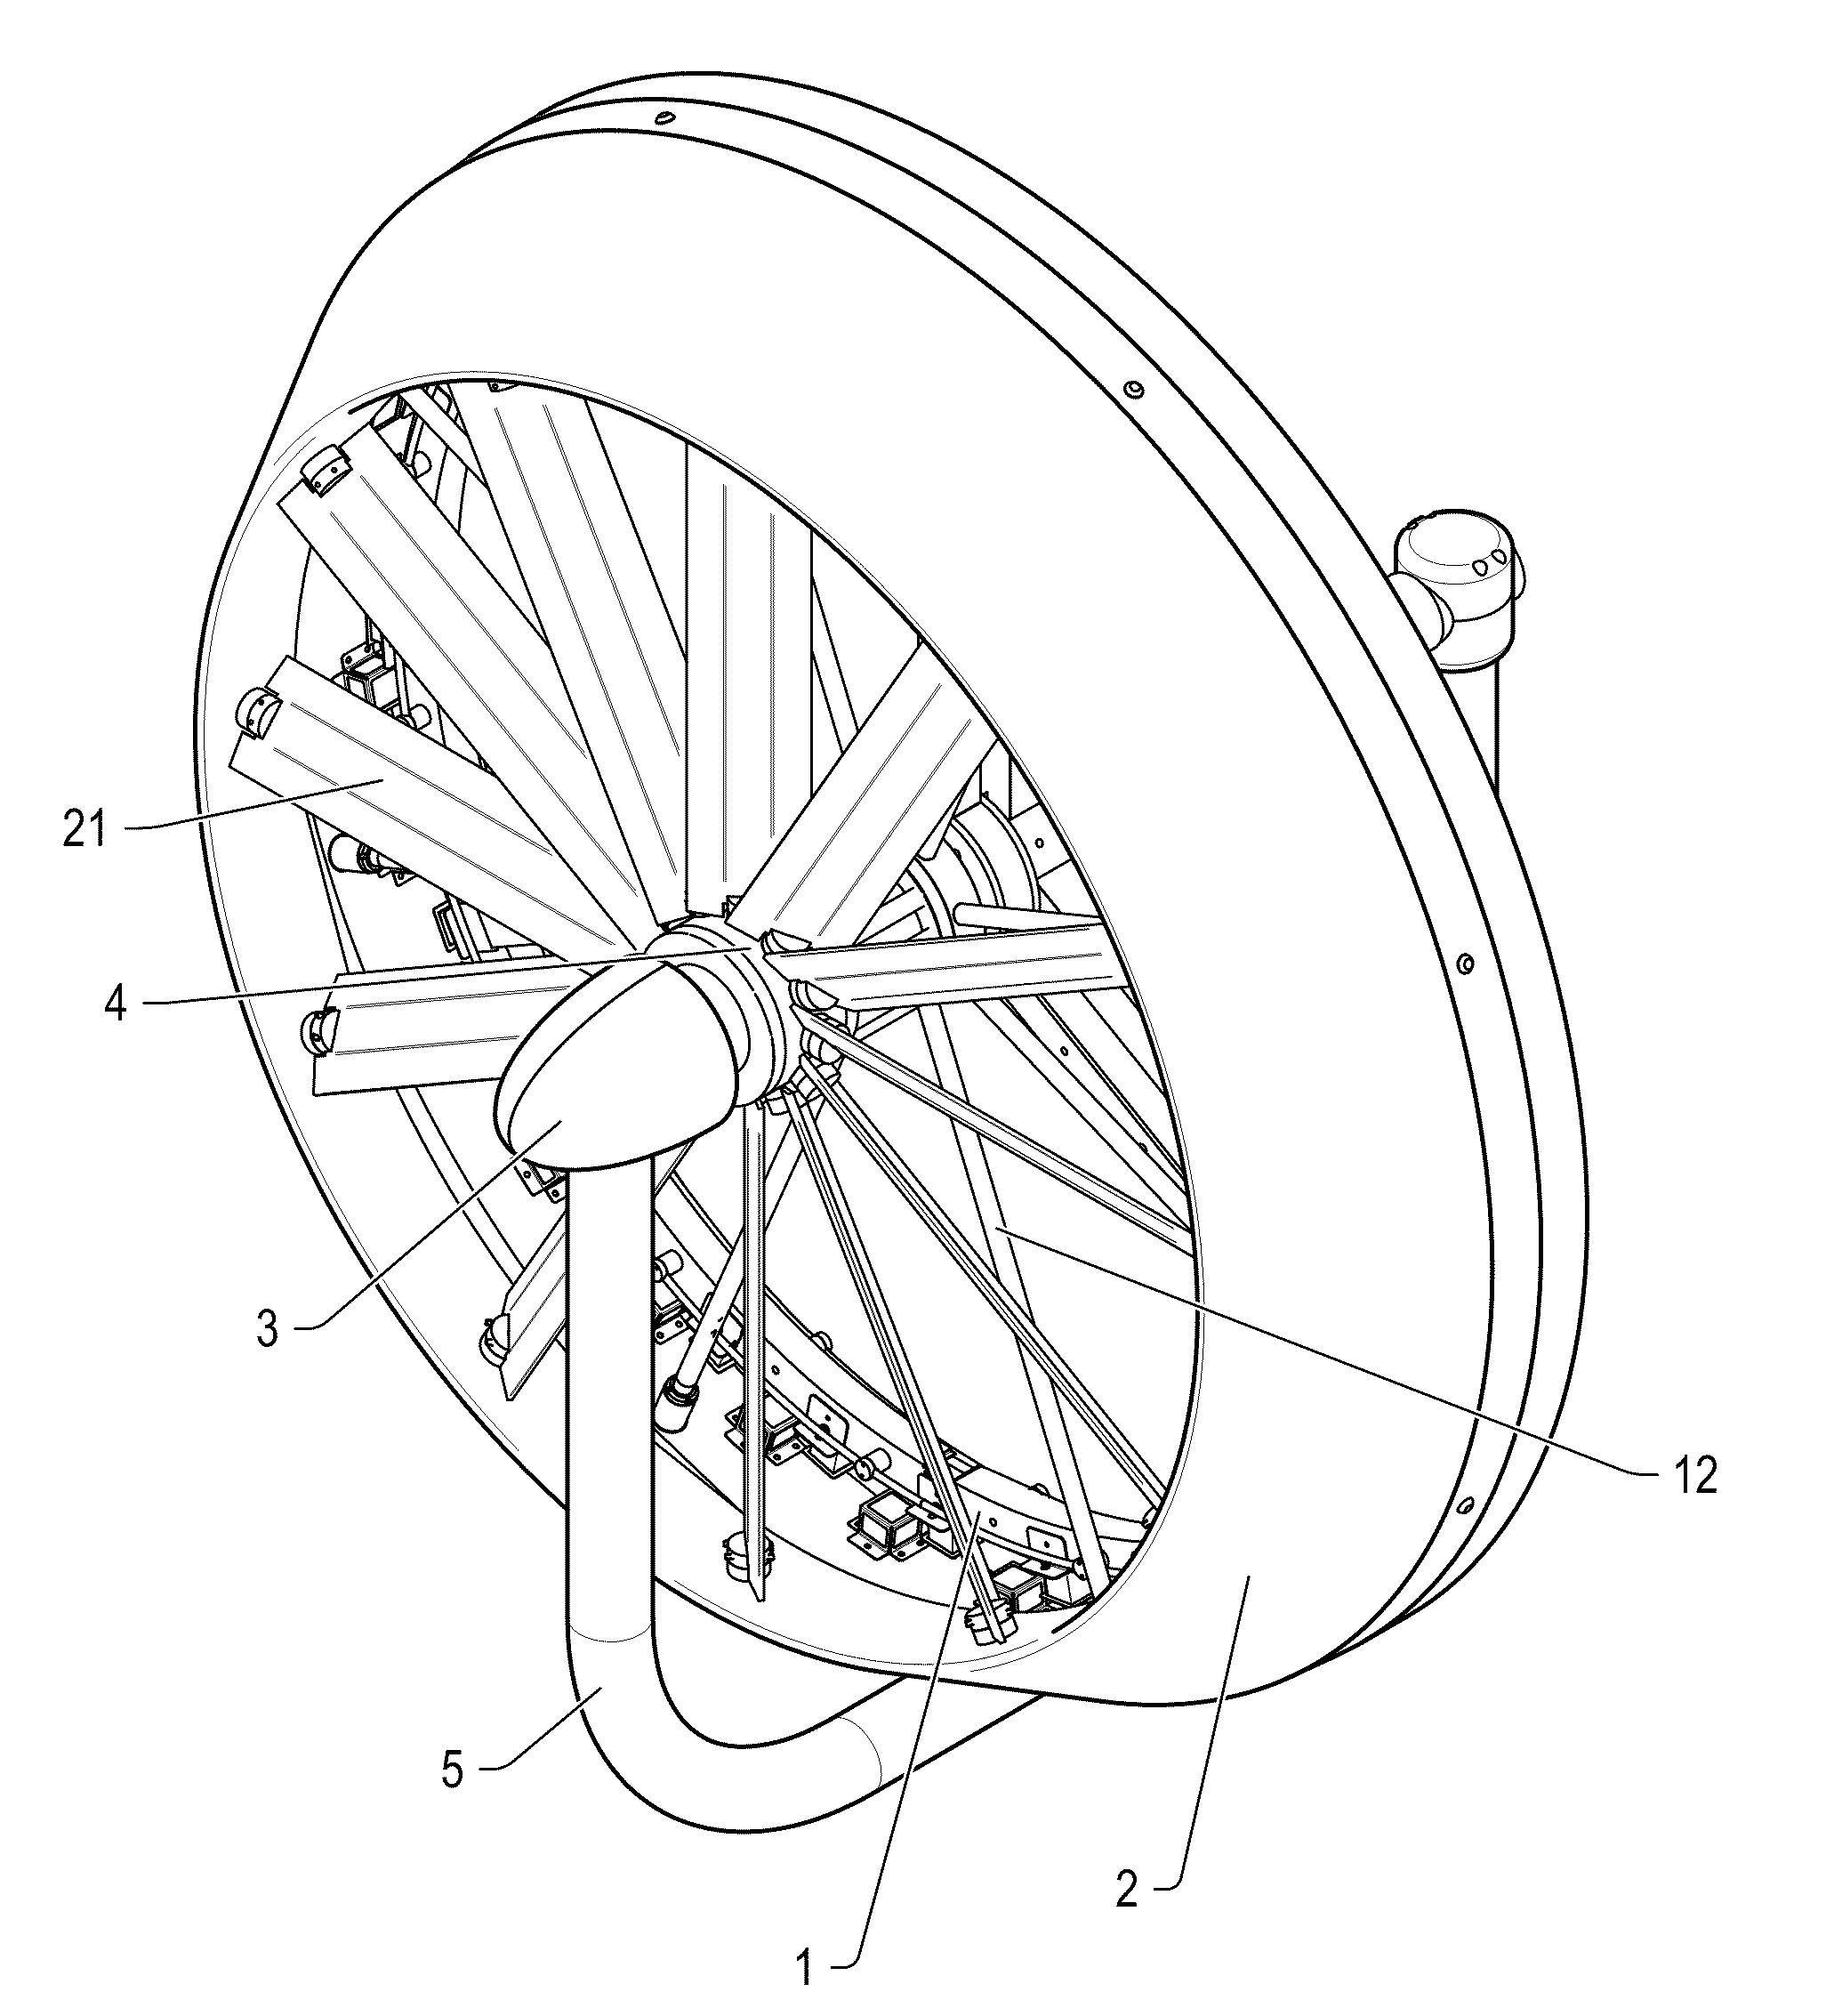 Direct Current Brushless Machine and Wind Turbine System